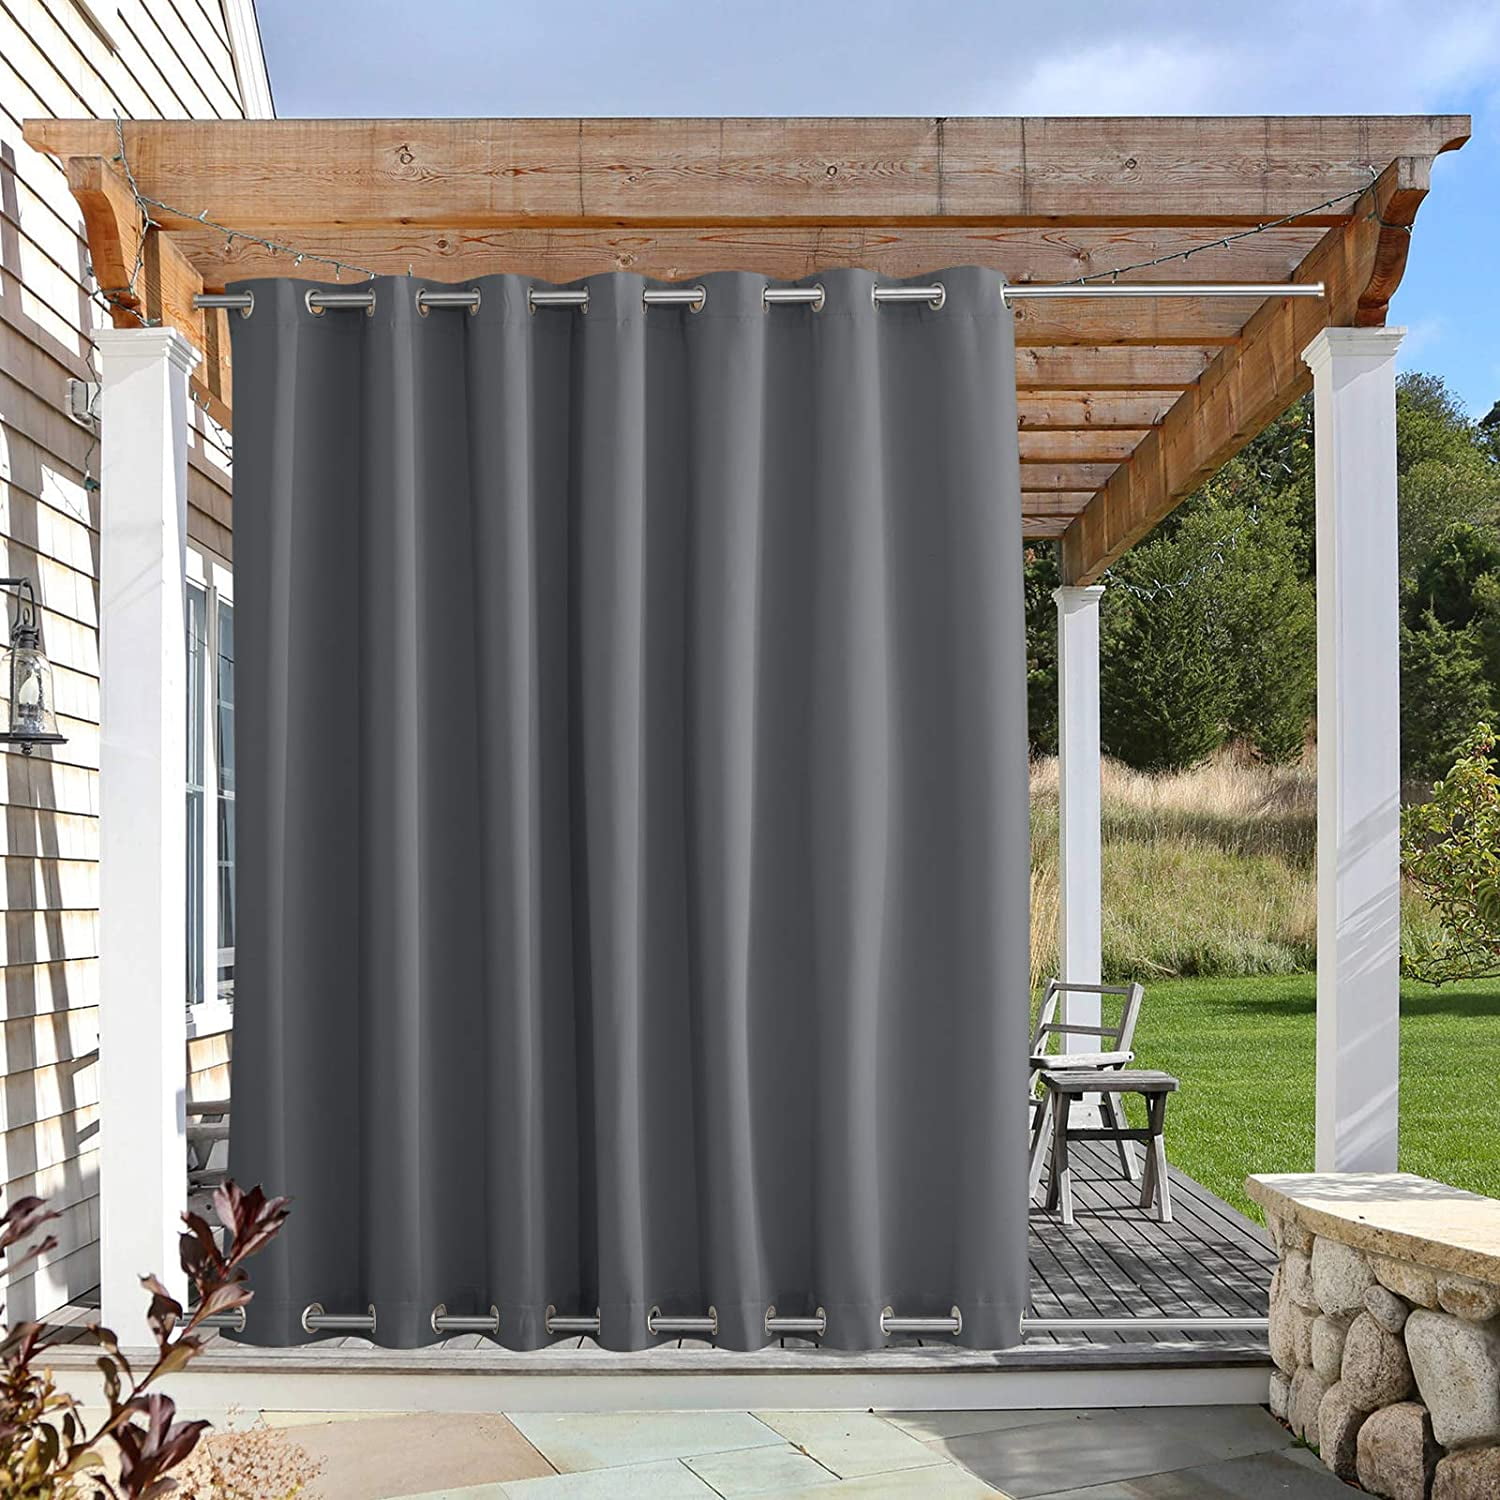 Indoor/outdoor Curtain Divider For Patio Extra Wide Blackout Thermal Insulated D 